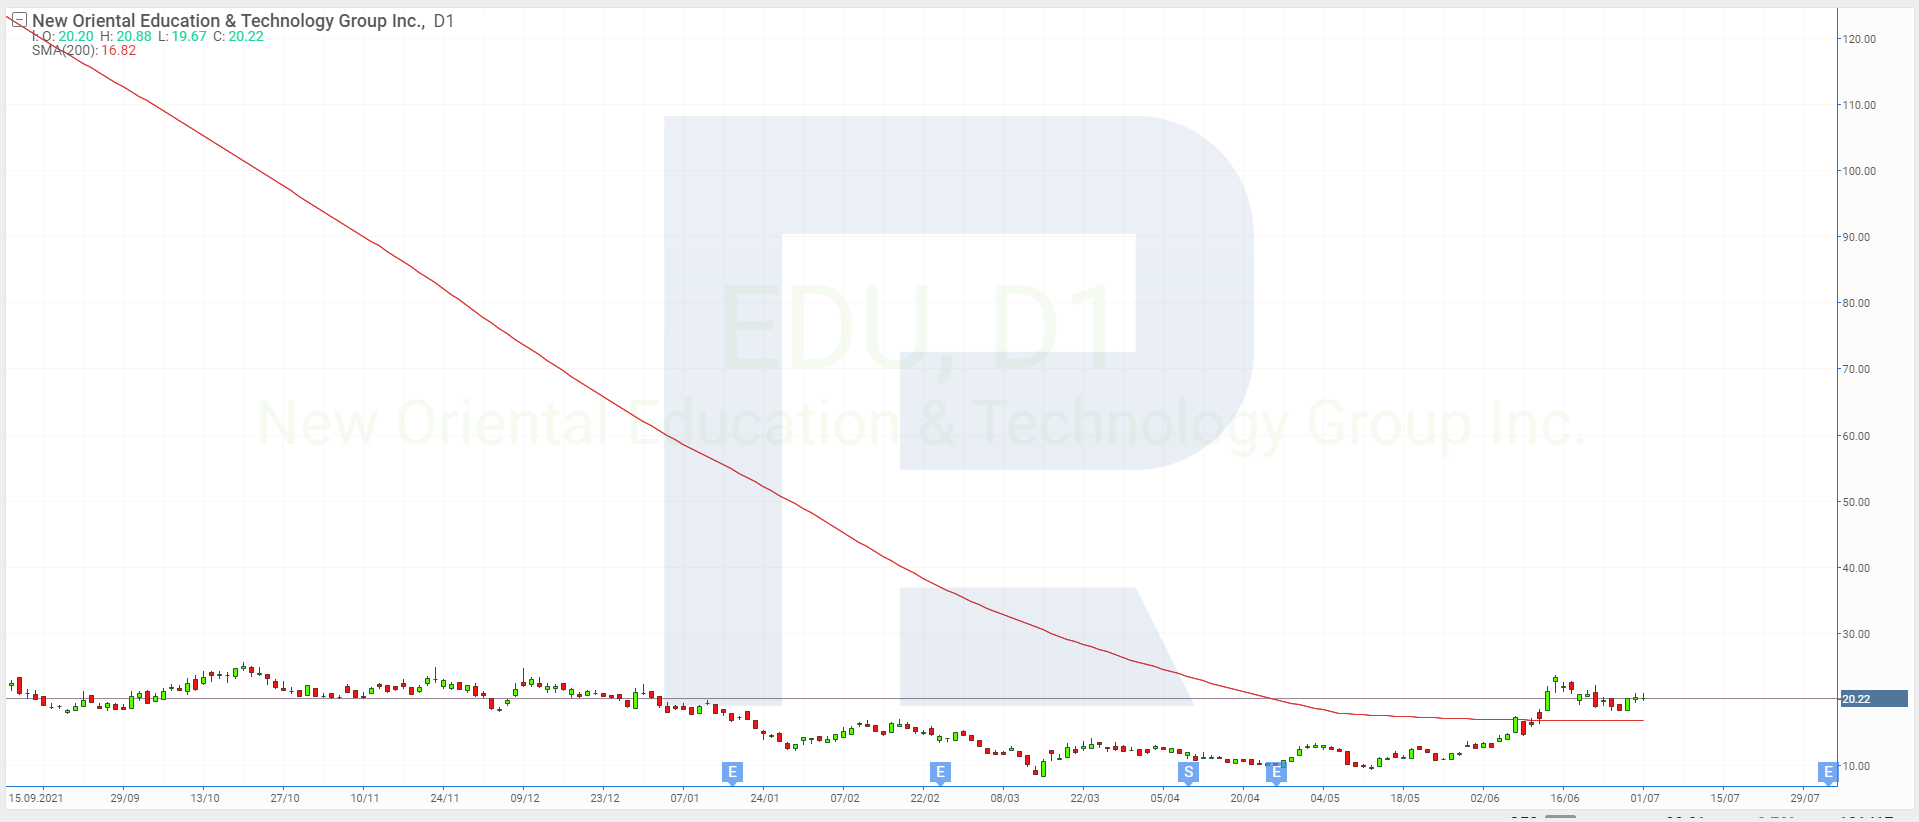 Share price charts of New Oriental Education & Technology Group Inc.